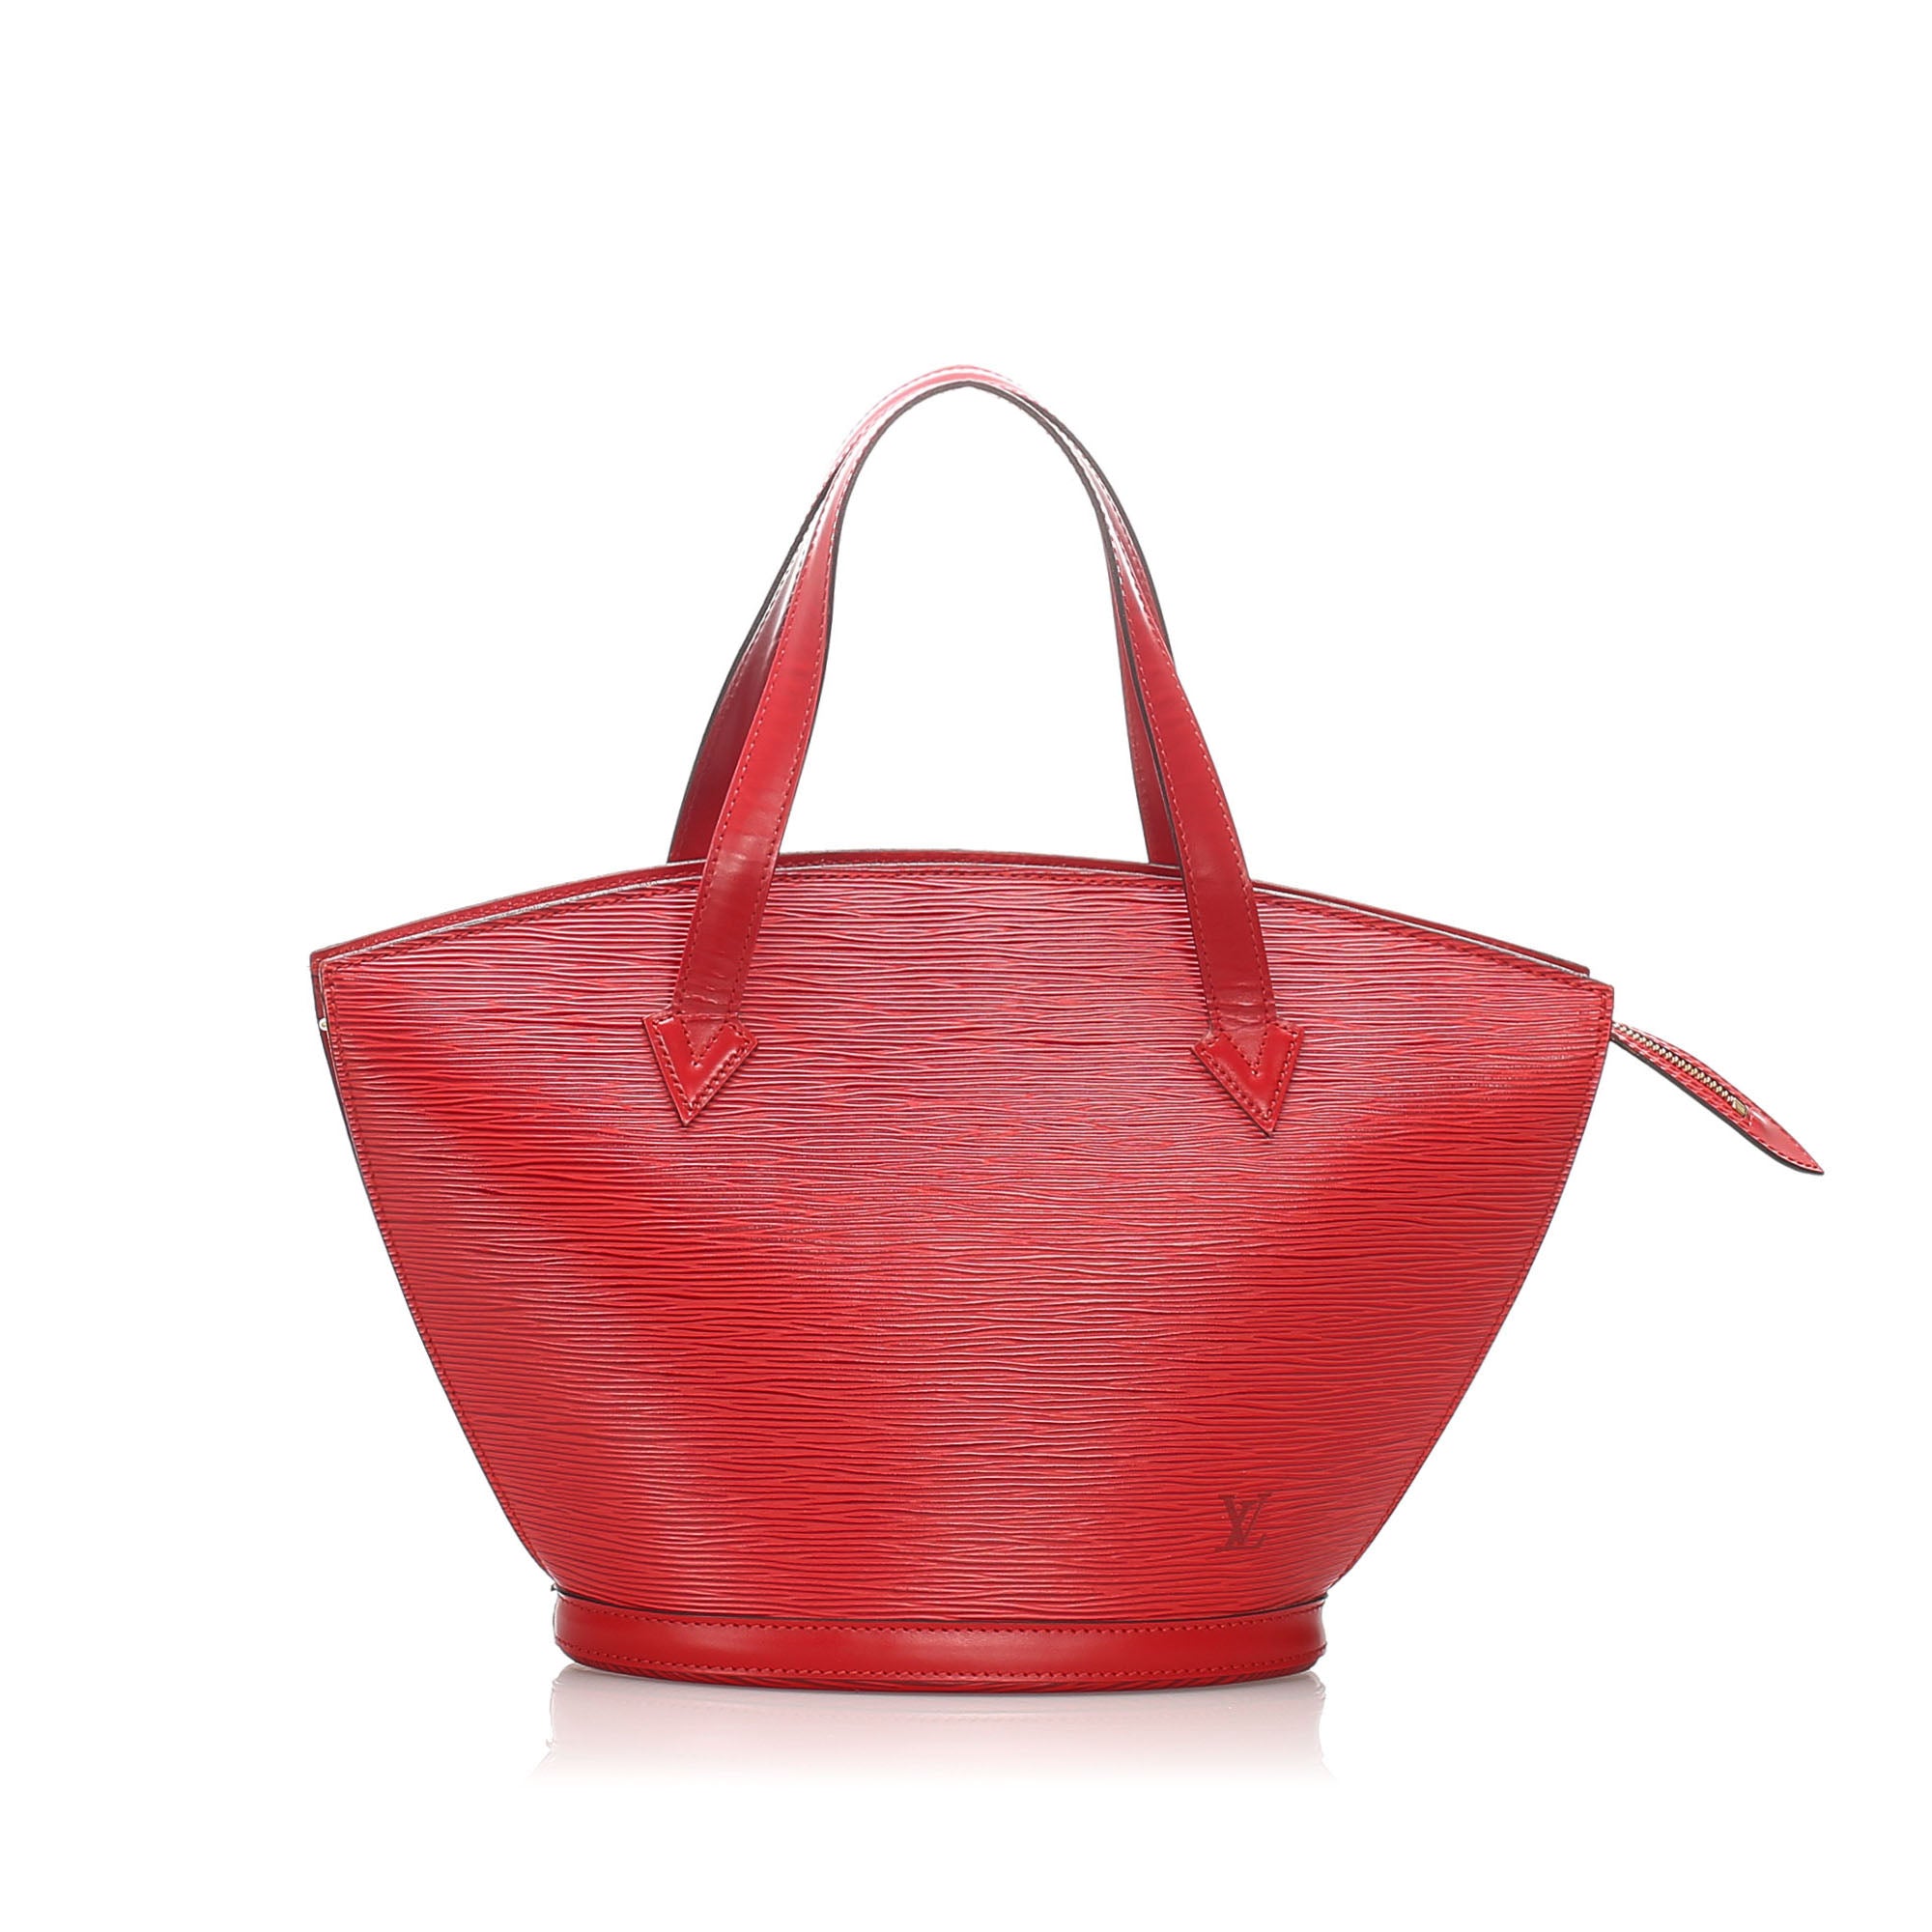 Louis Vuitton Saint Jacques small model shopping bag in red epi leather